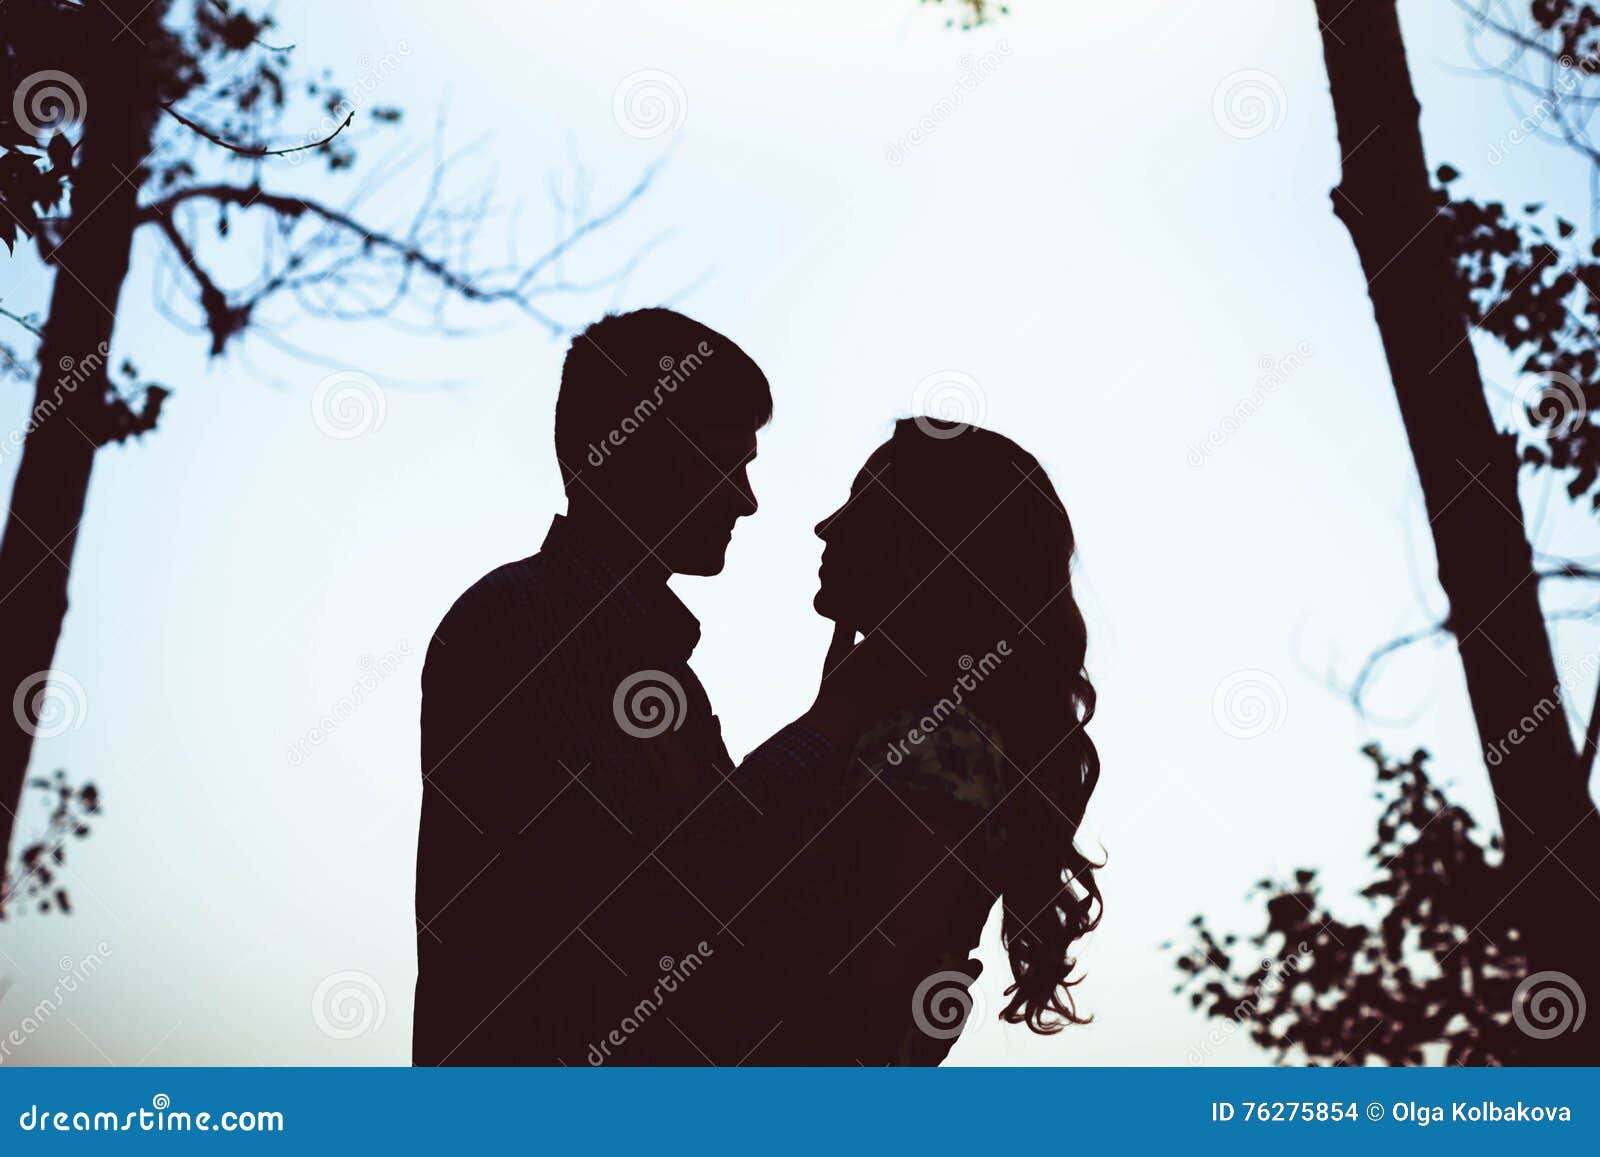 silhouette of two lovers embracing in the forest.